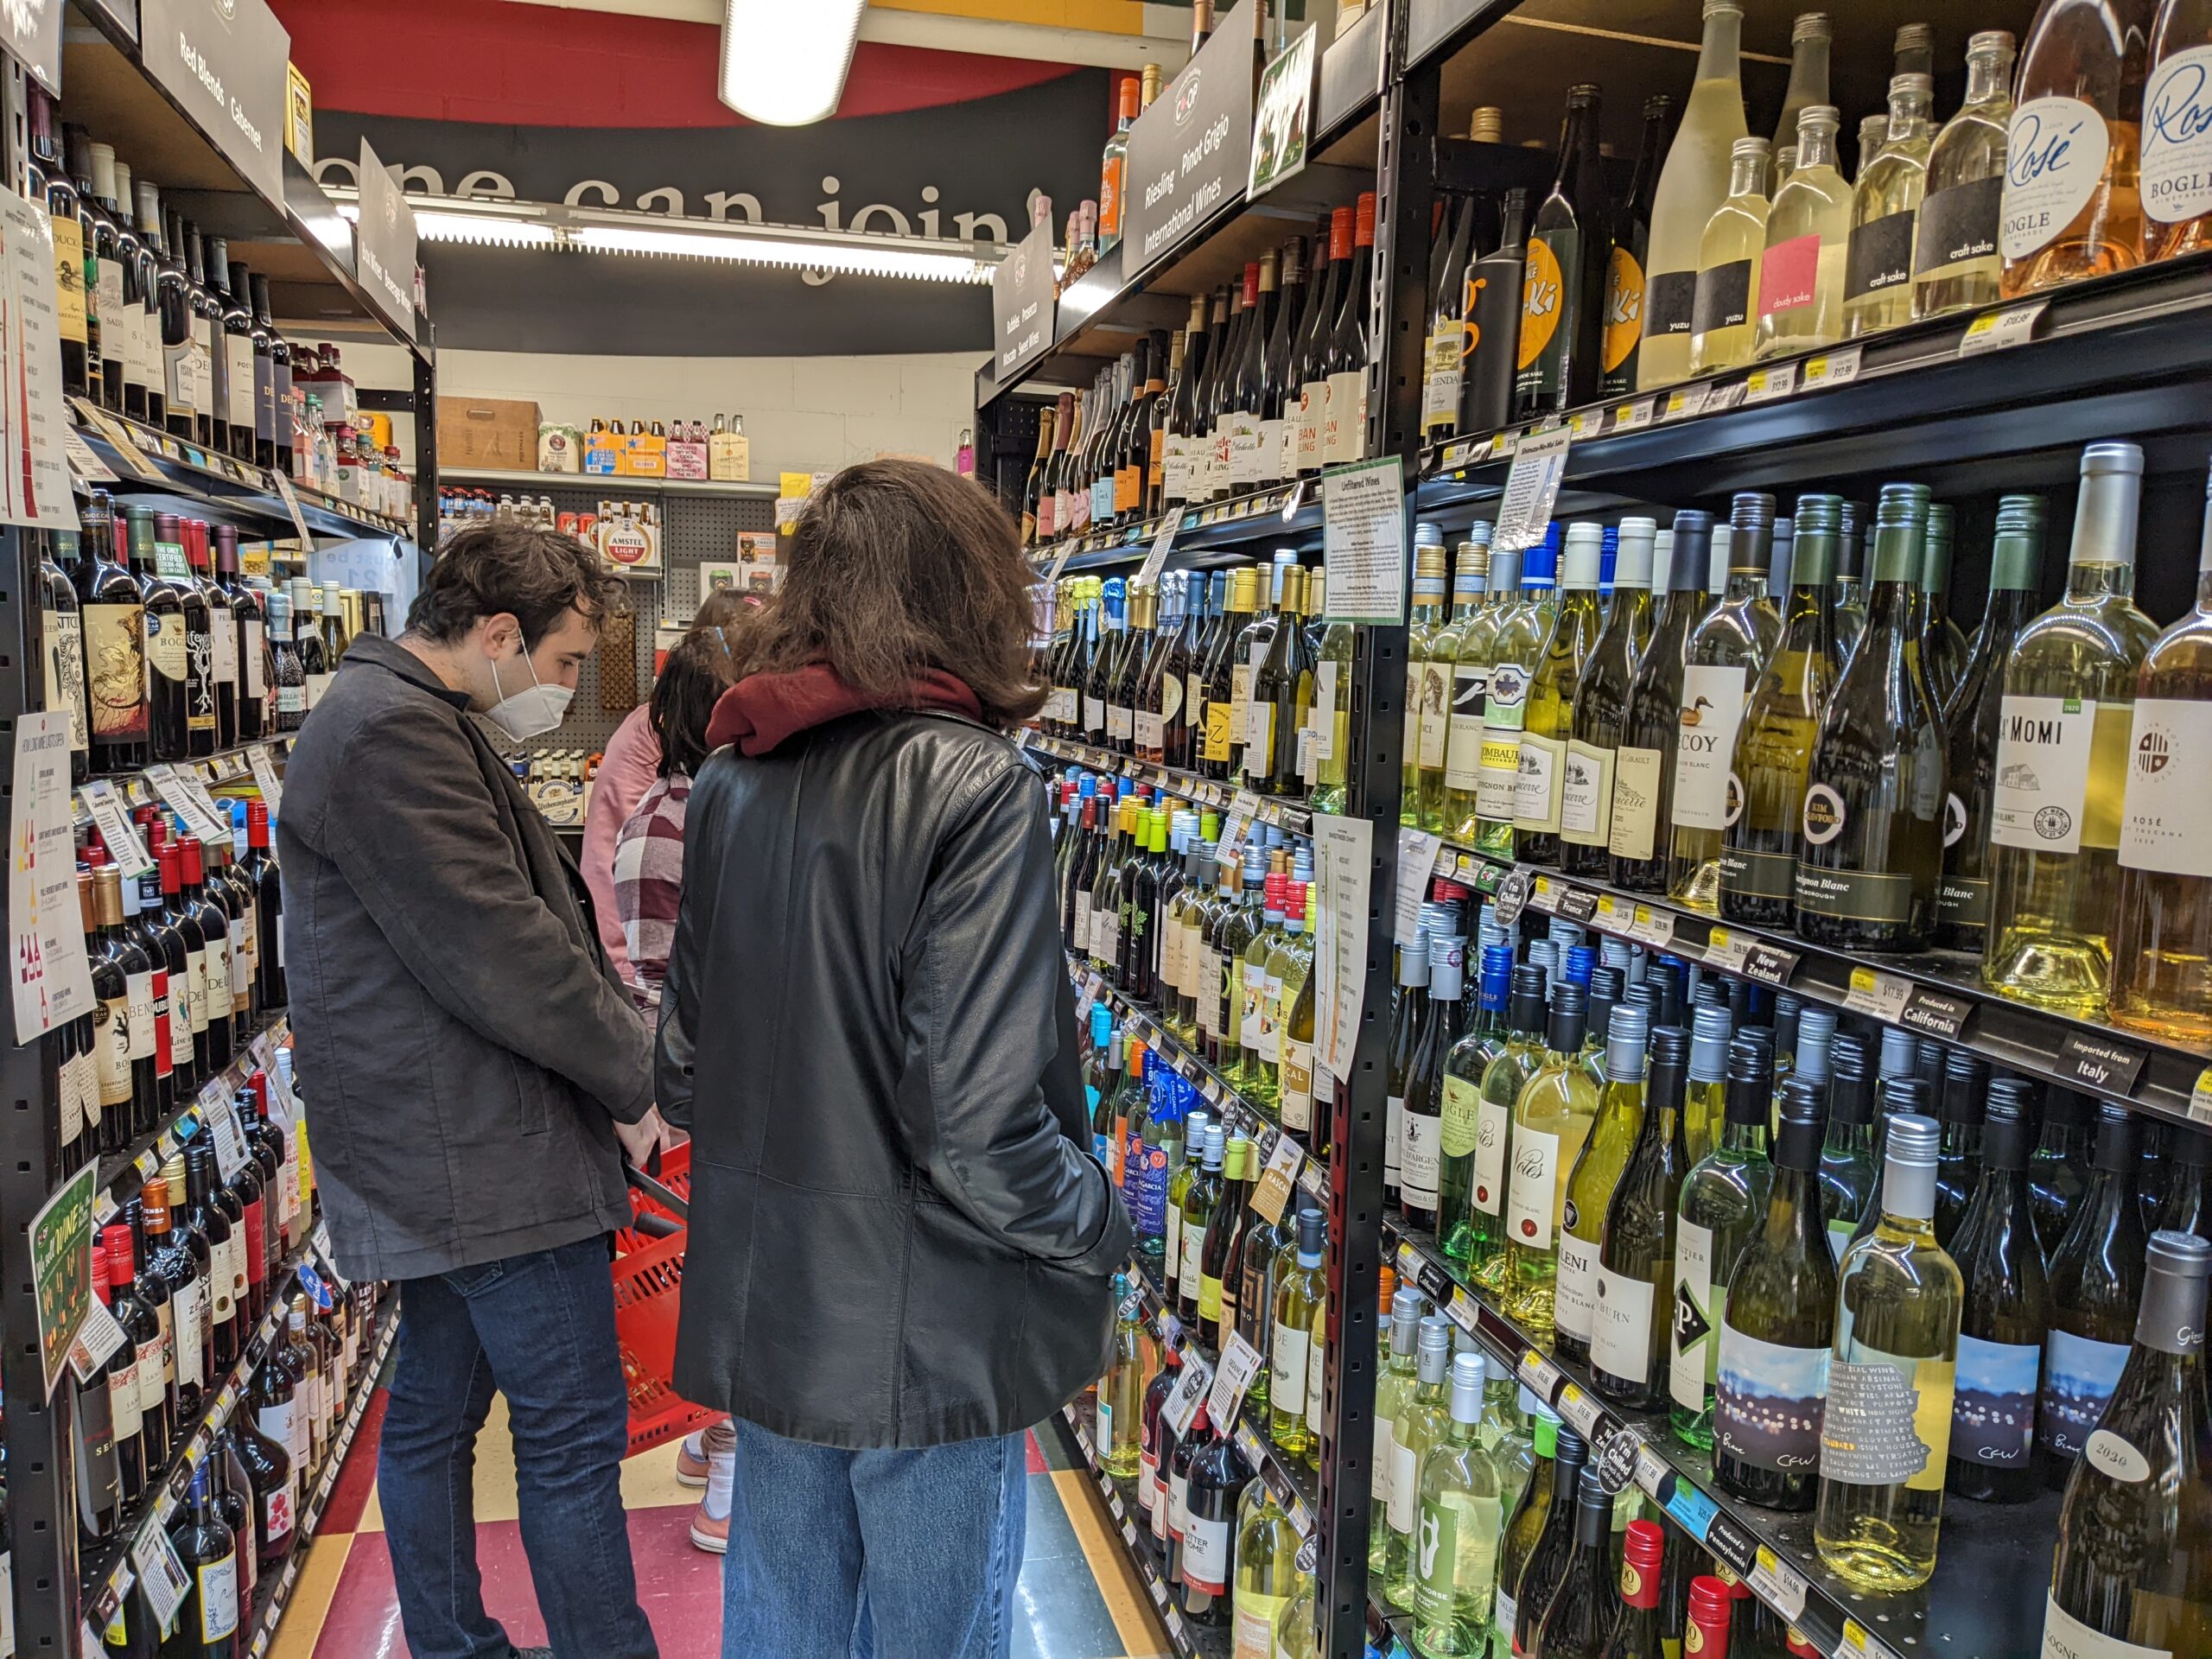 Students looking at wine in the Swarthmore CO-OP's wine aisle